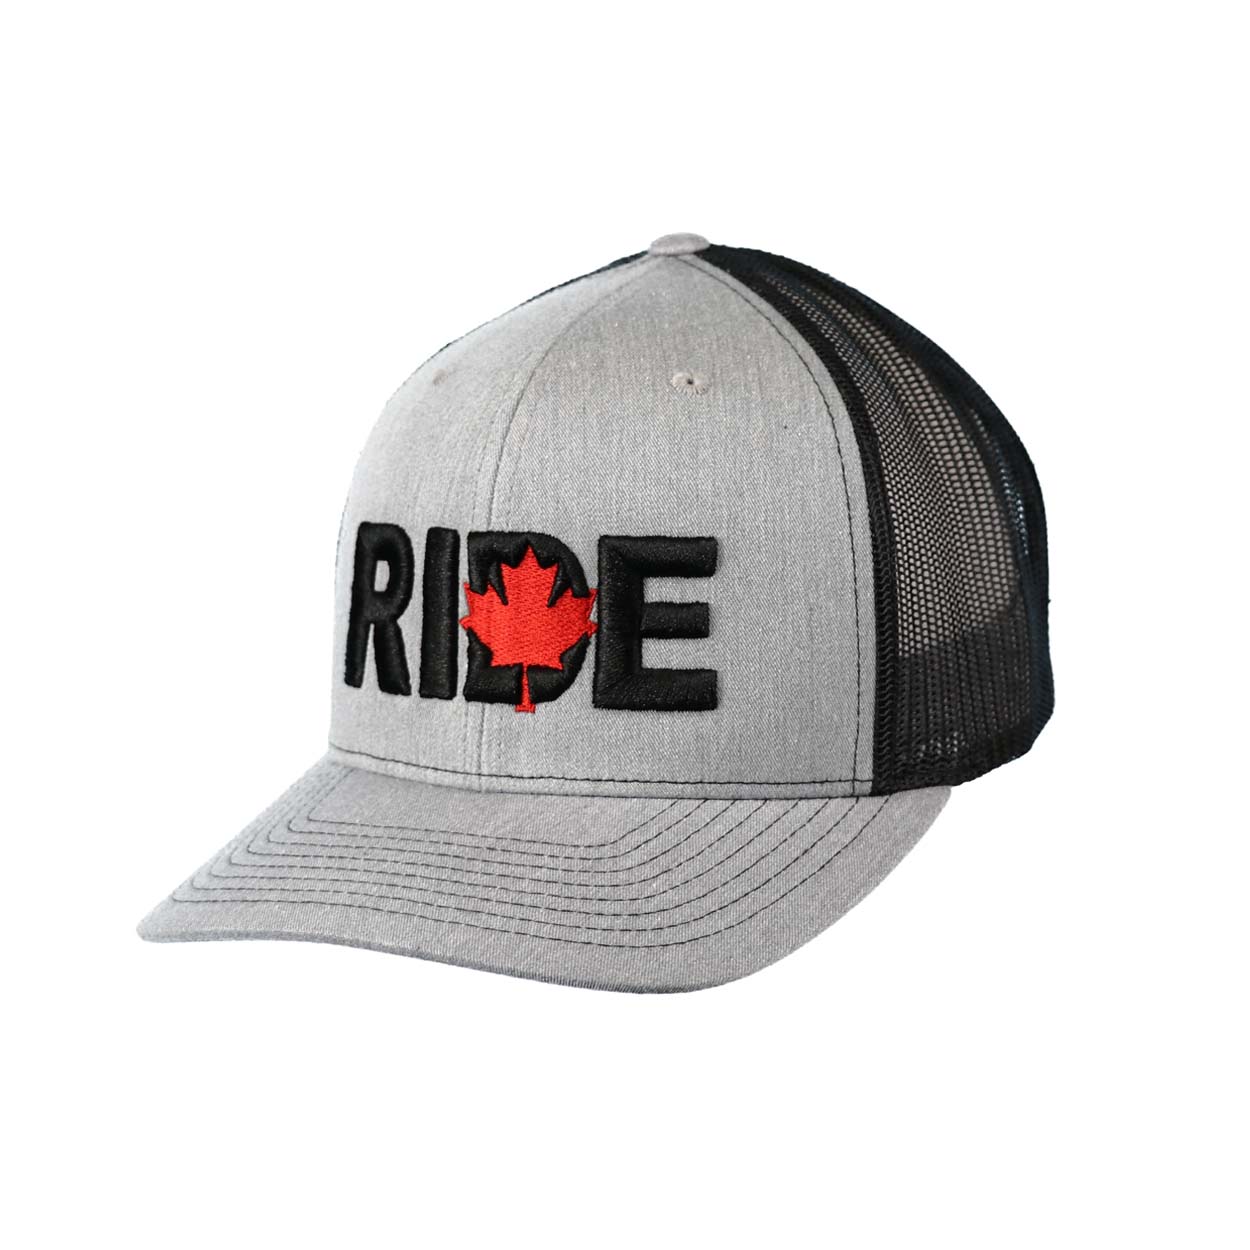 Ride Canada Classic Pro 3D Puff Embroidered Snapback Trucker Hat Gray/Red